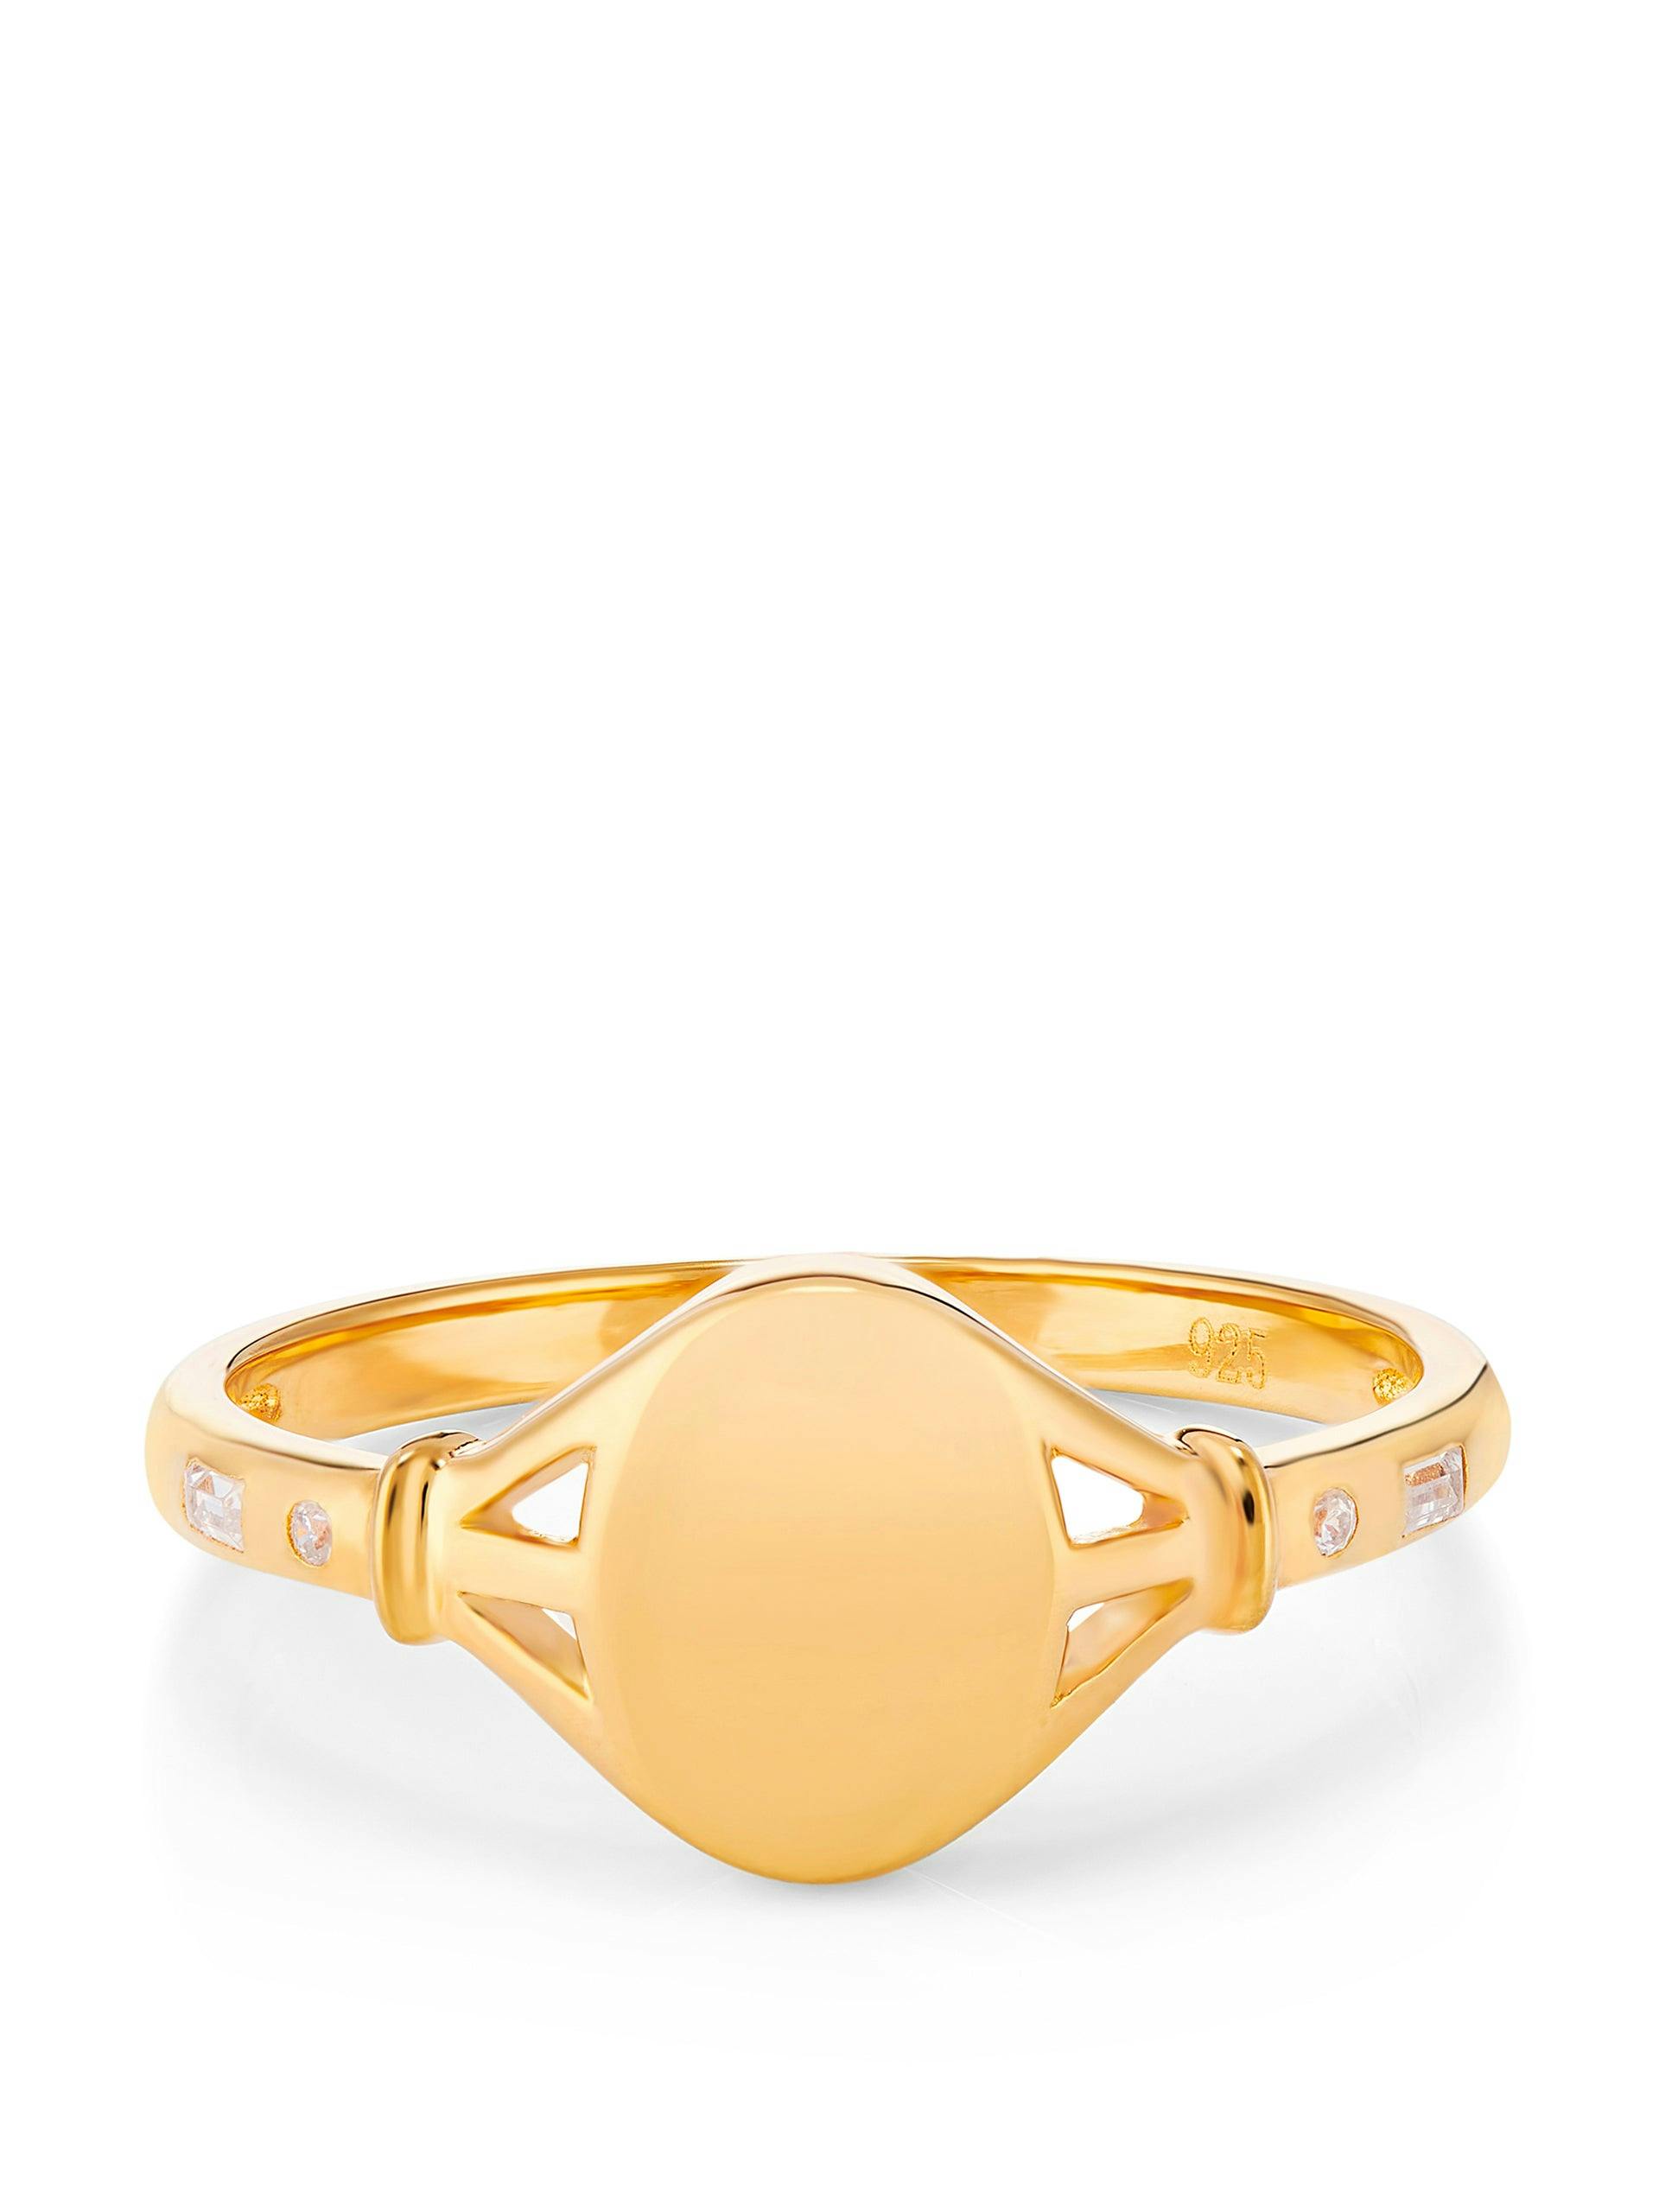 Tilly 9kt gold and diamond signet ring